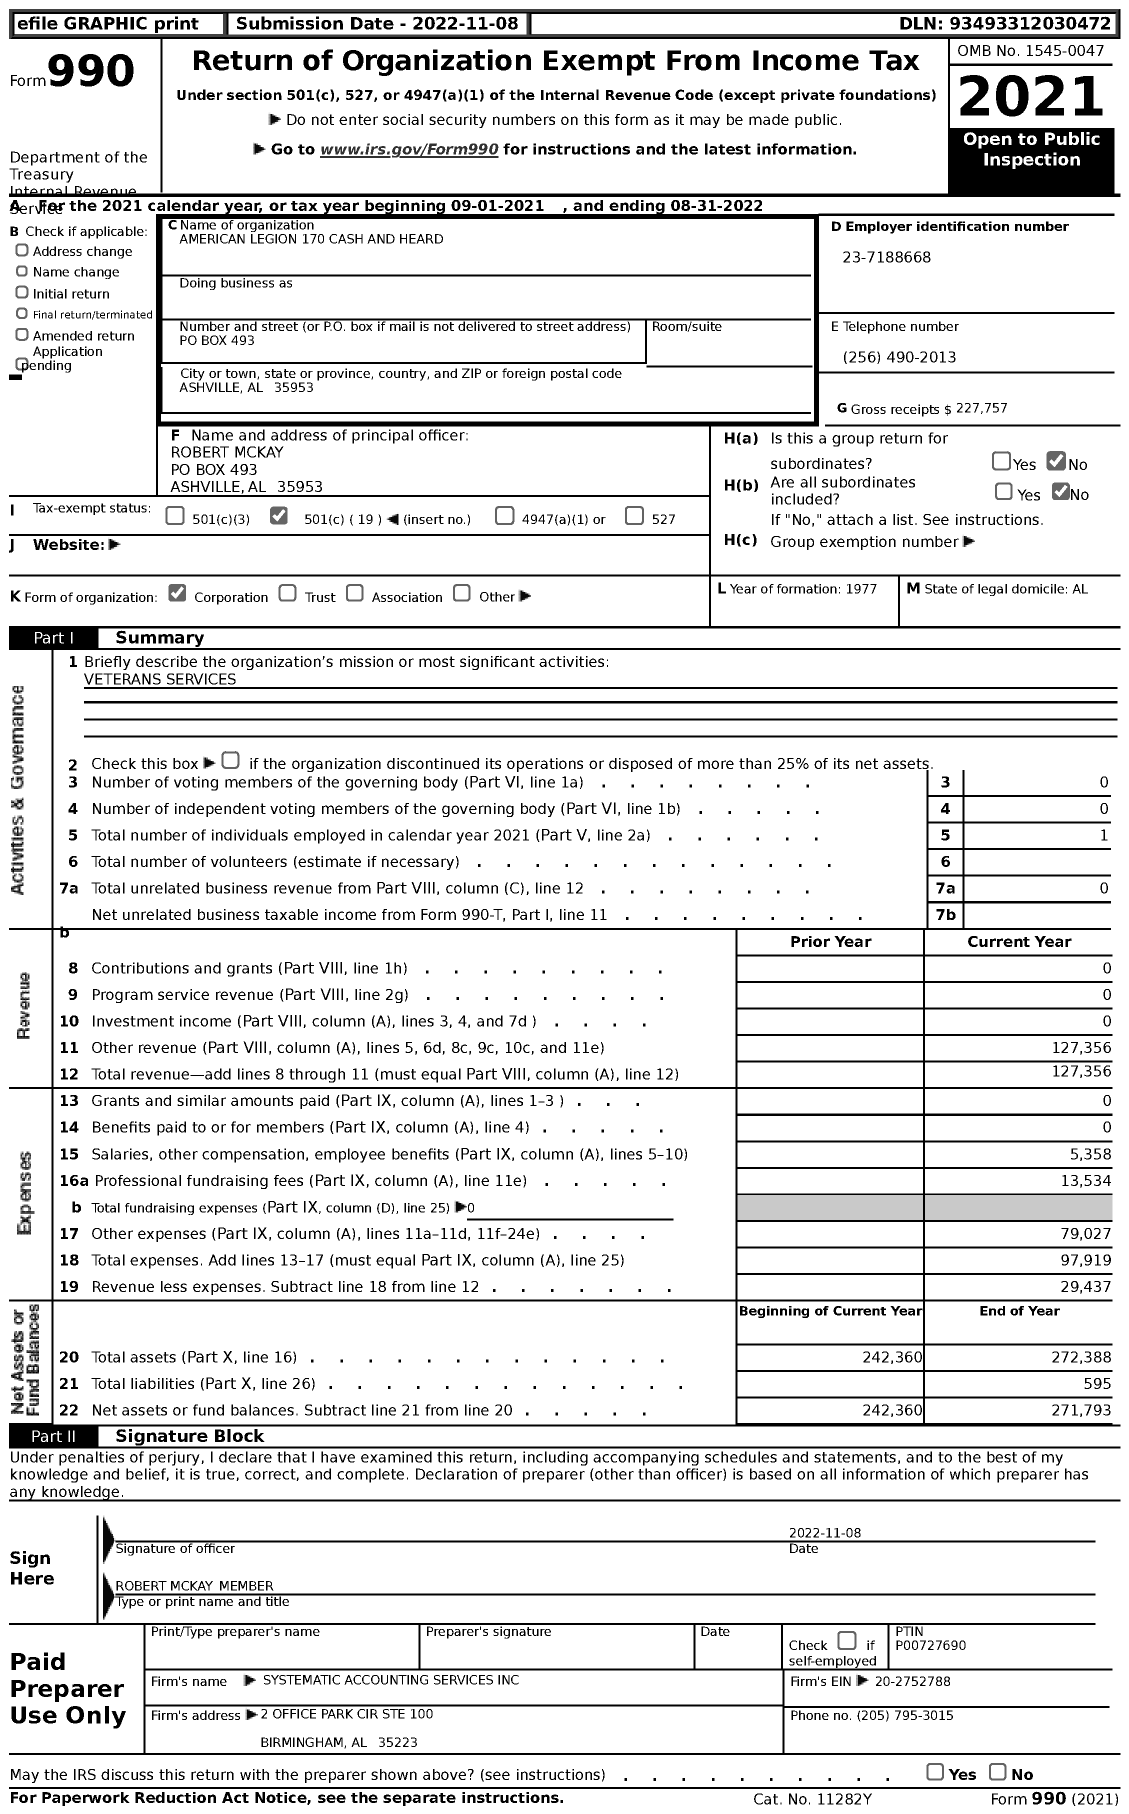 Image of first page of 2021 Form 990 for AMERICAN LEGION 170 CASH and HEARD